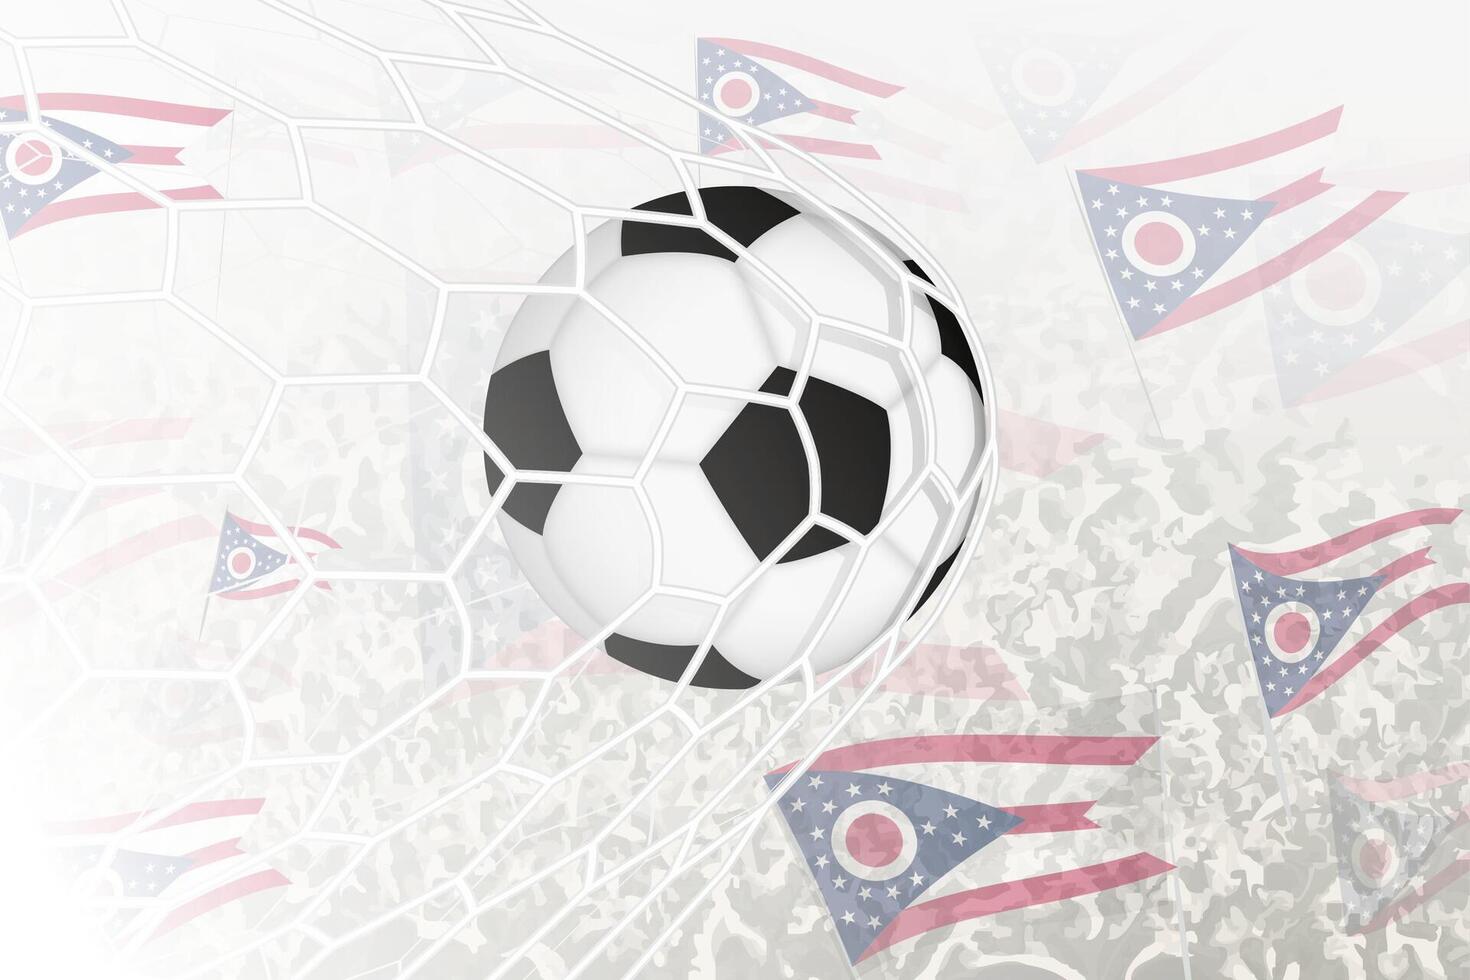 National Football team of Ohio scored goal. Ball in goal net, while football supporters are waving the Ohio flag in the background. vector